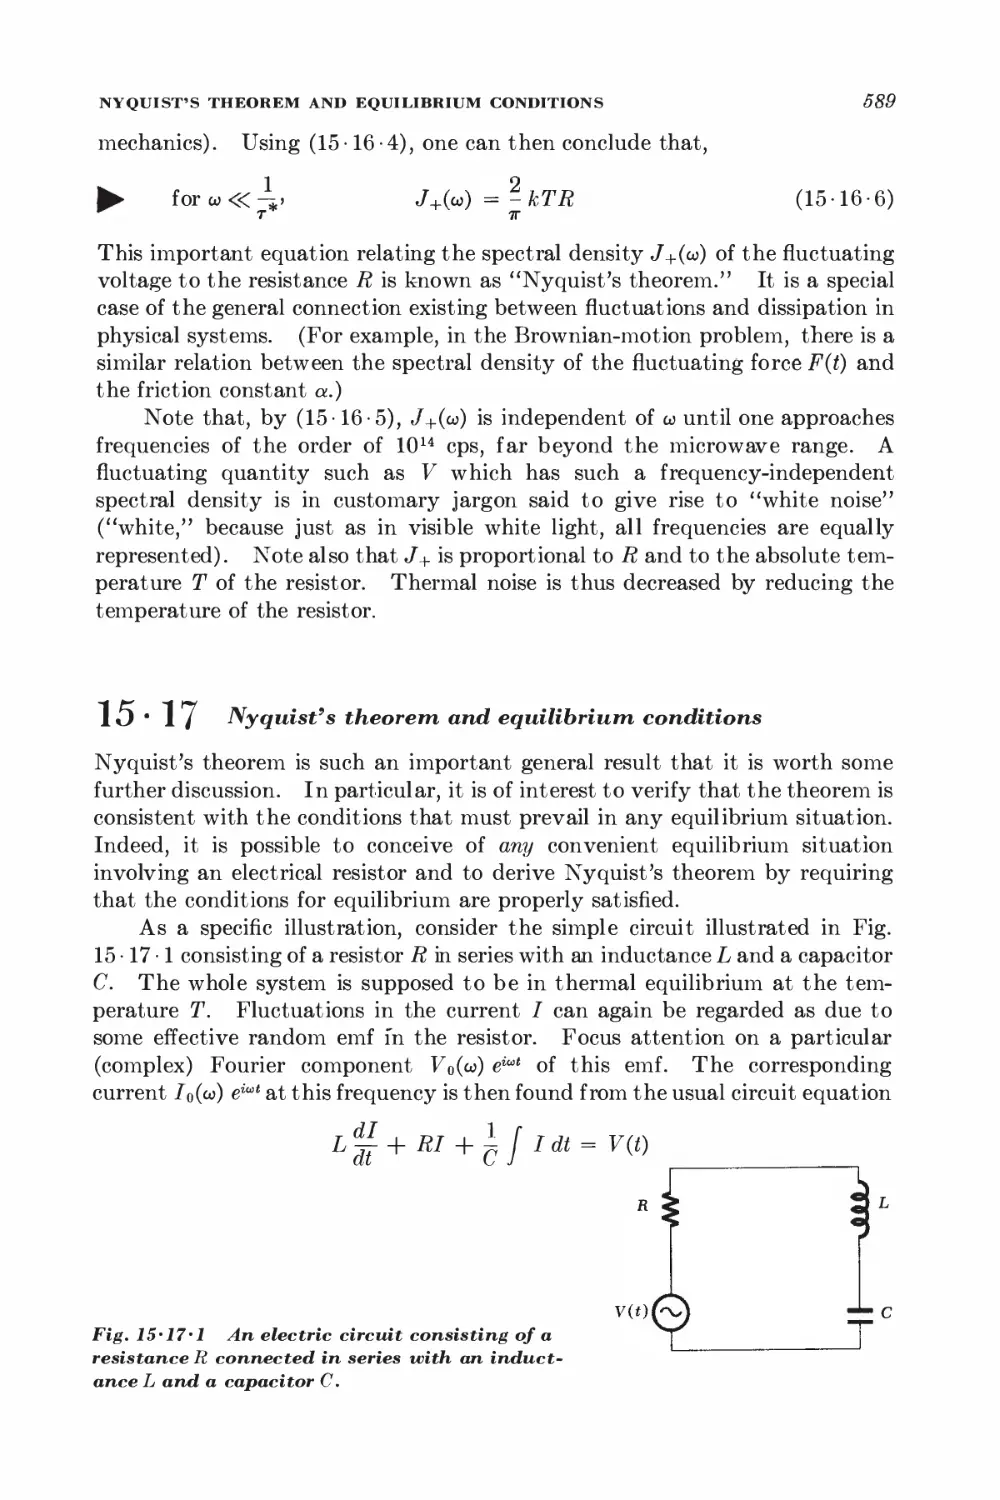 15.17 Nyquist's theorem and equilibrium conditions